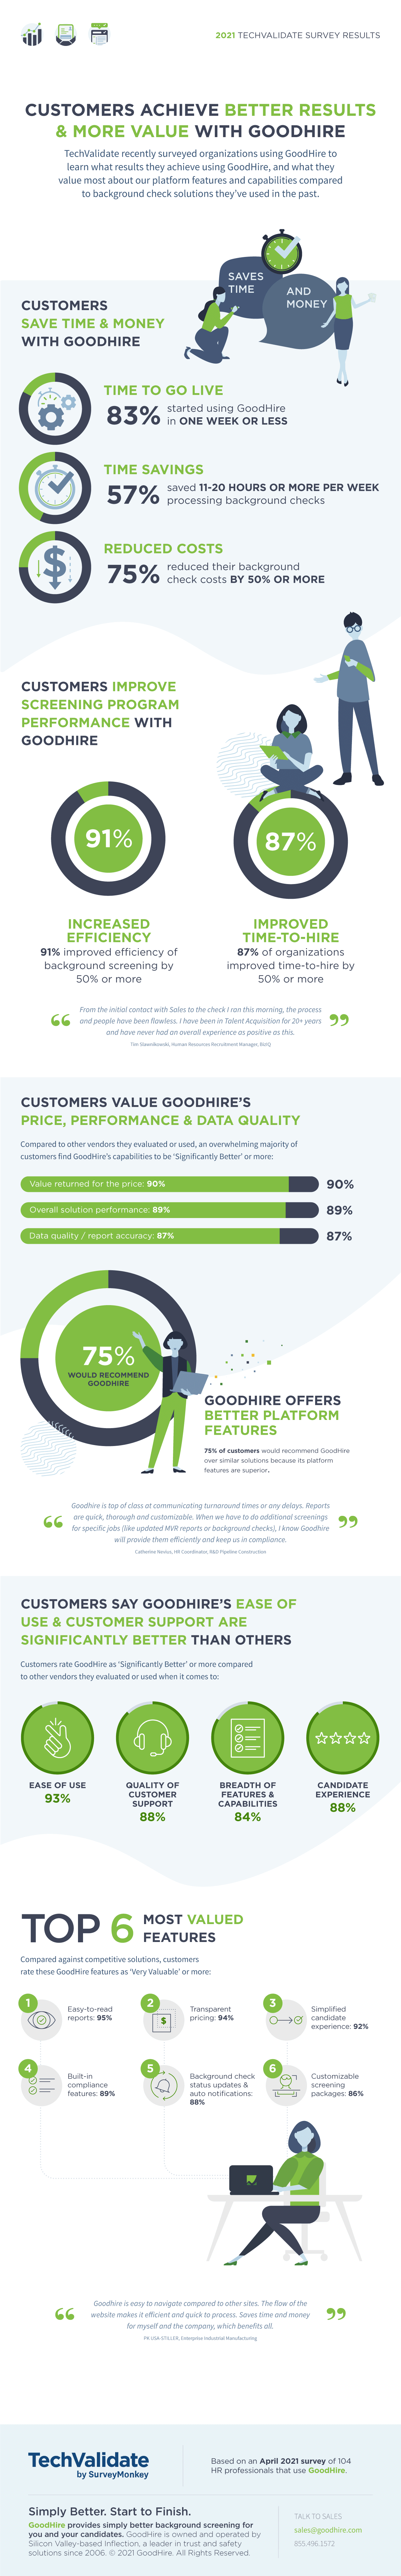 Infographic shows recent GoodHire customer survey results from TechValidate.